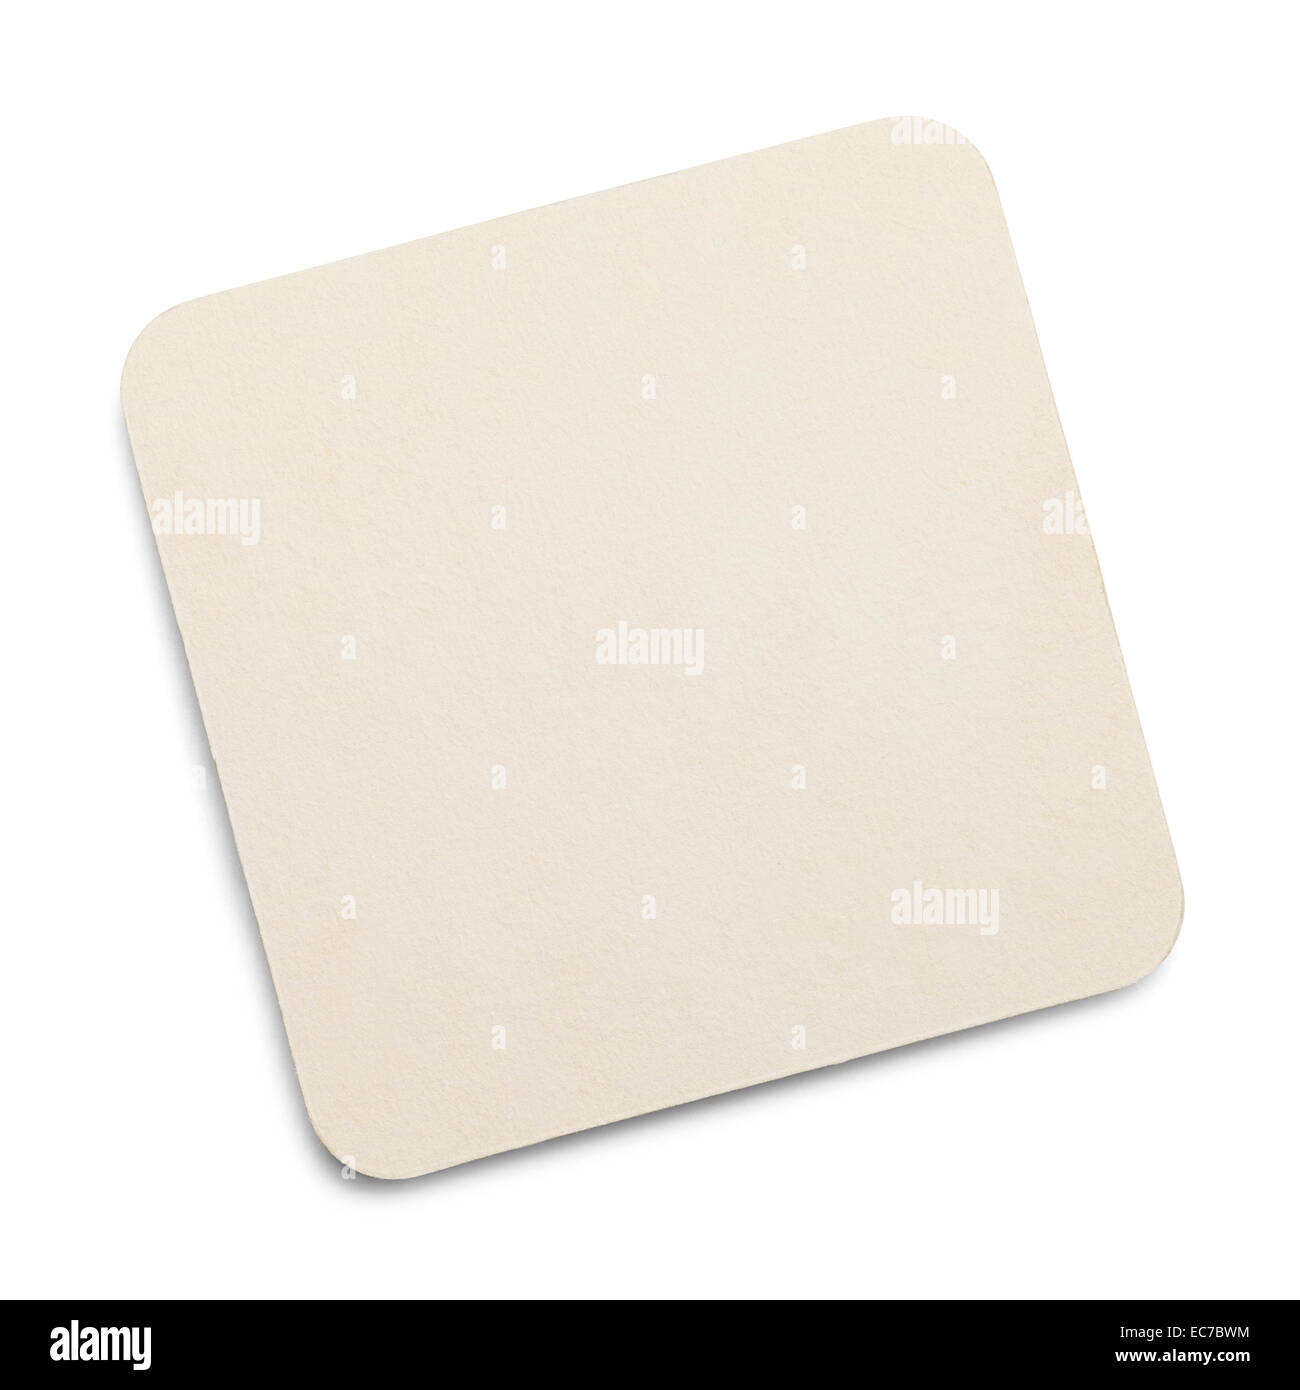 Square White Drink Coaster with Copy Space Isolated on White Background. Stock Photo